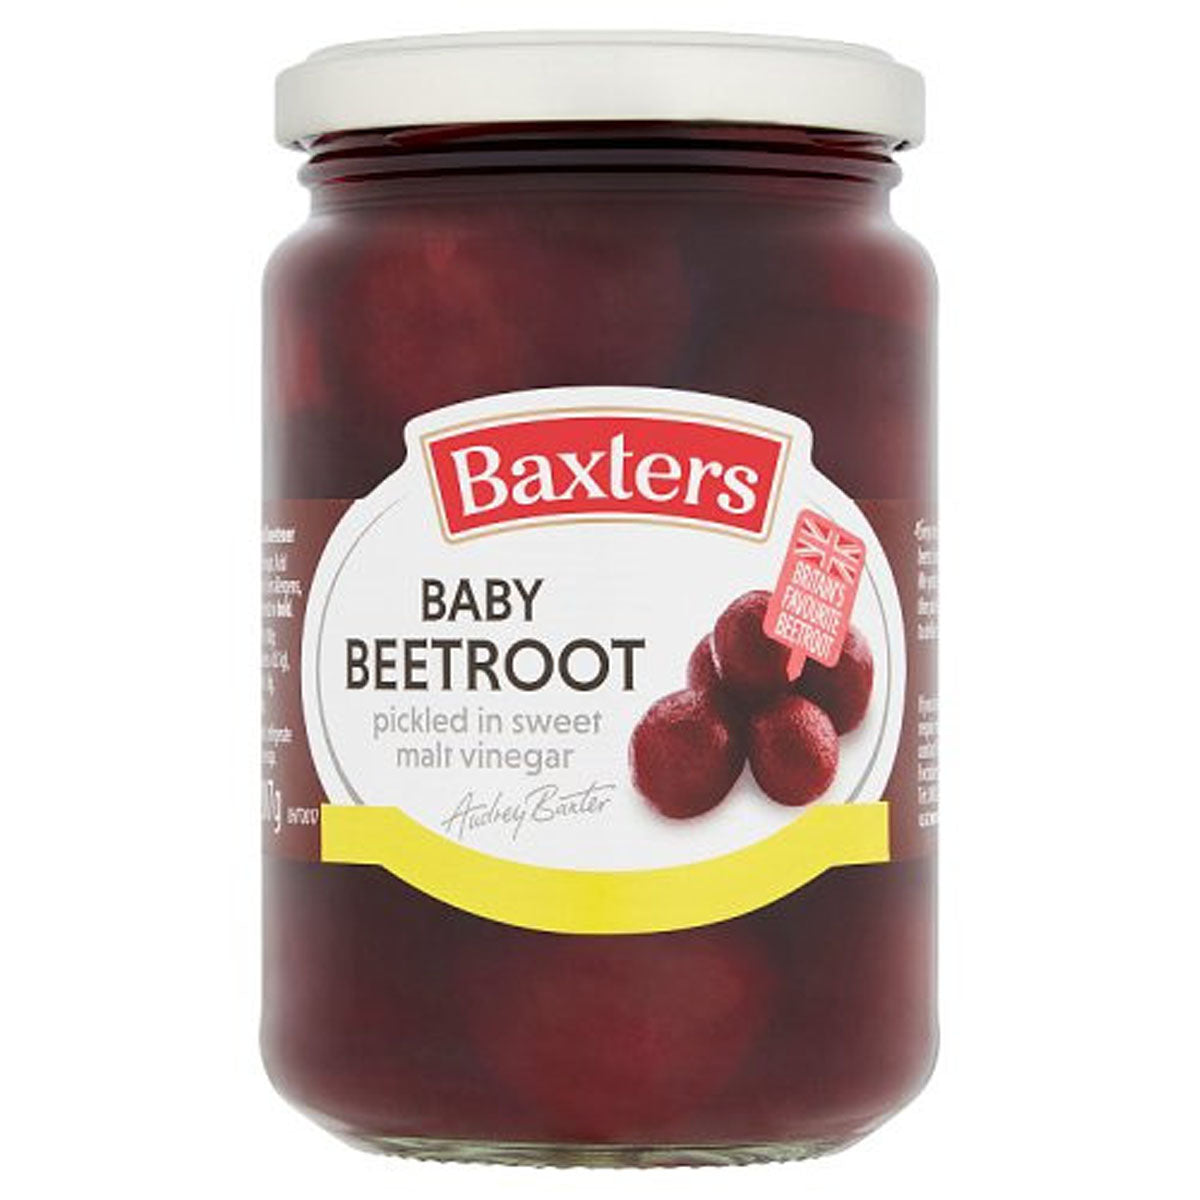 Baxters - Baby Beetroot - 340g - Continental Food Store